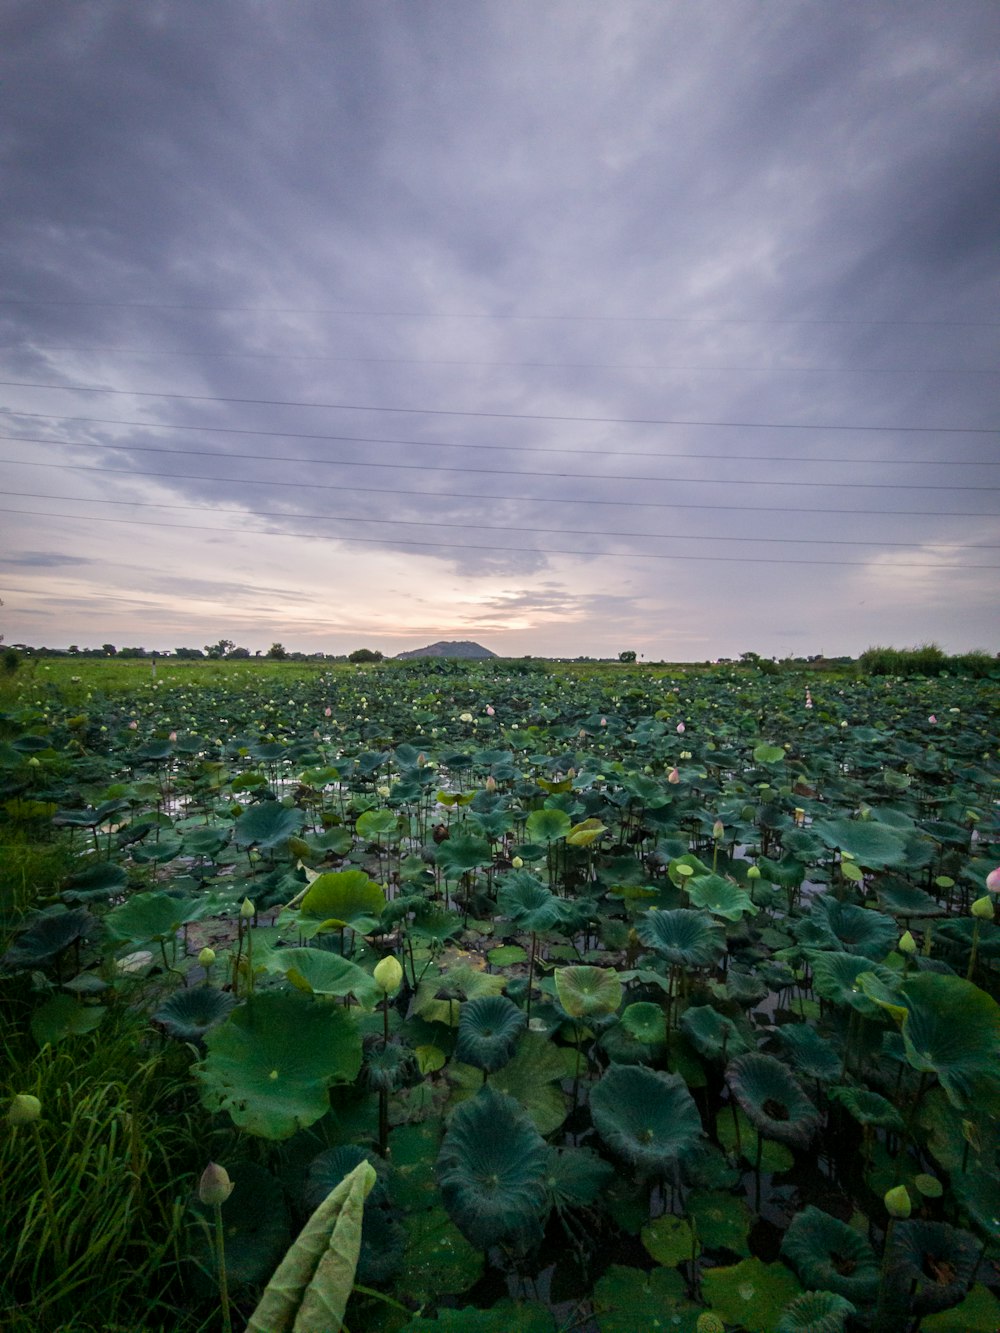 a field full of water lilies under a cloudy sky